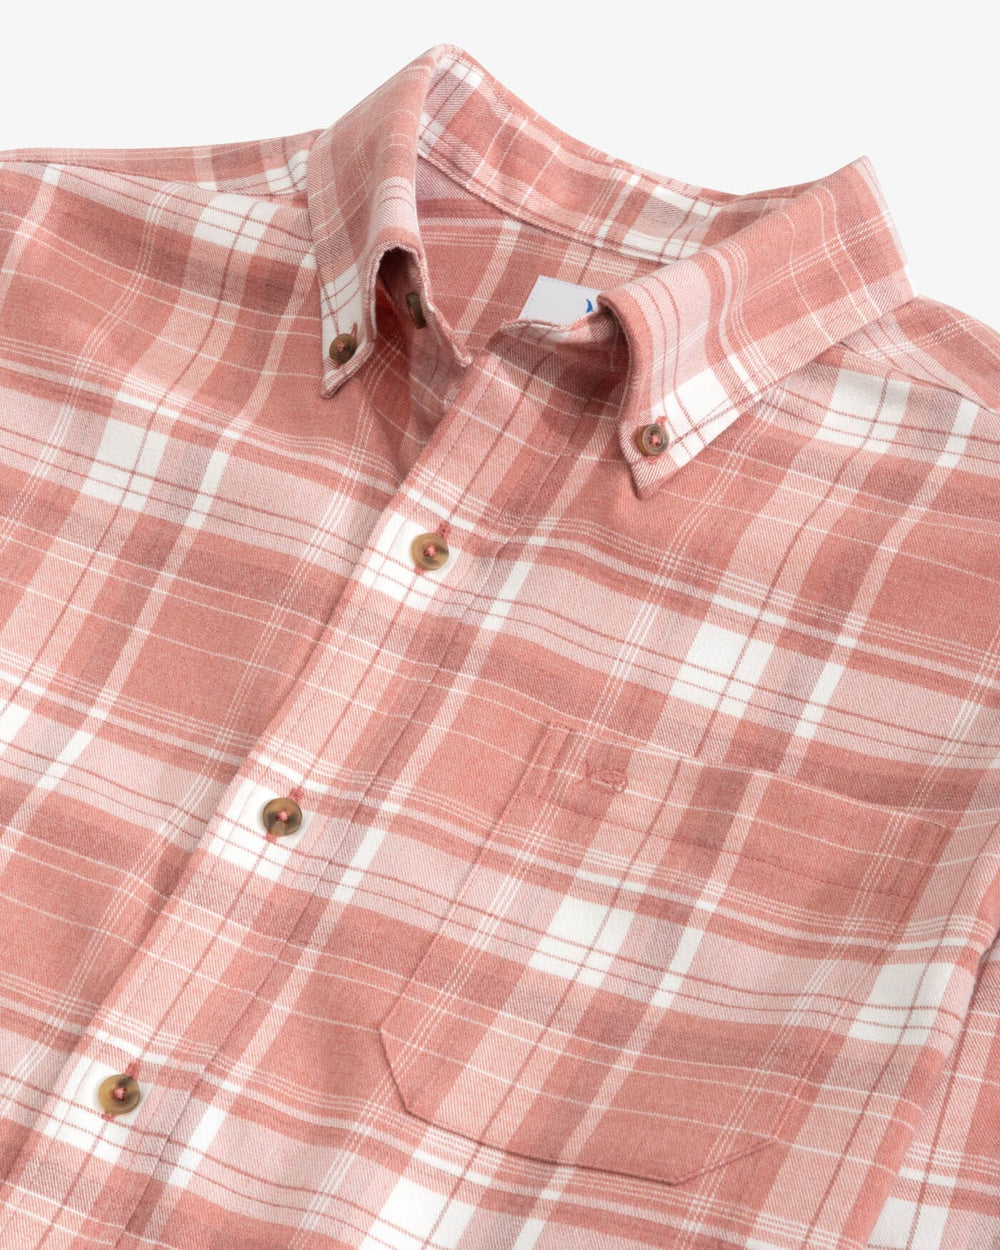 The detail view of the Southern Tide Heather Avondale Plaid Sport Shirt by Southern Tide - Heather Dusty Coral